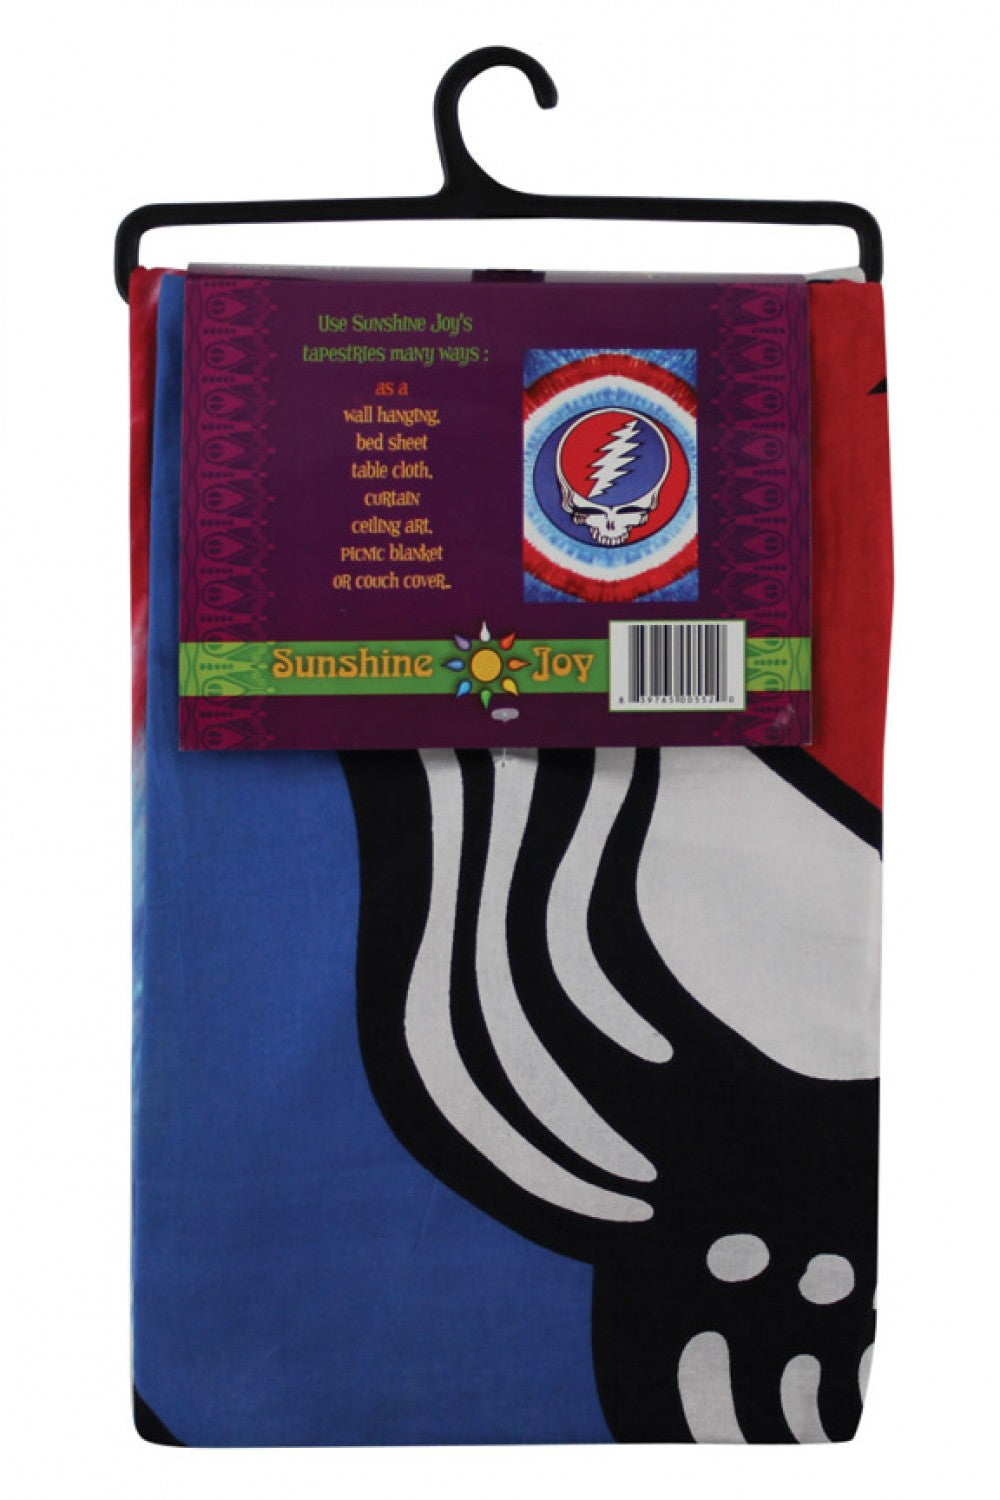 Grateful Dead Red White and Blue Steal Your Face Tapestry - eDeadShop